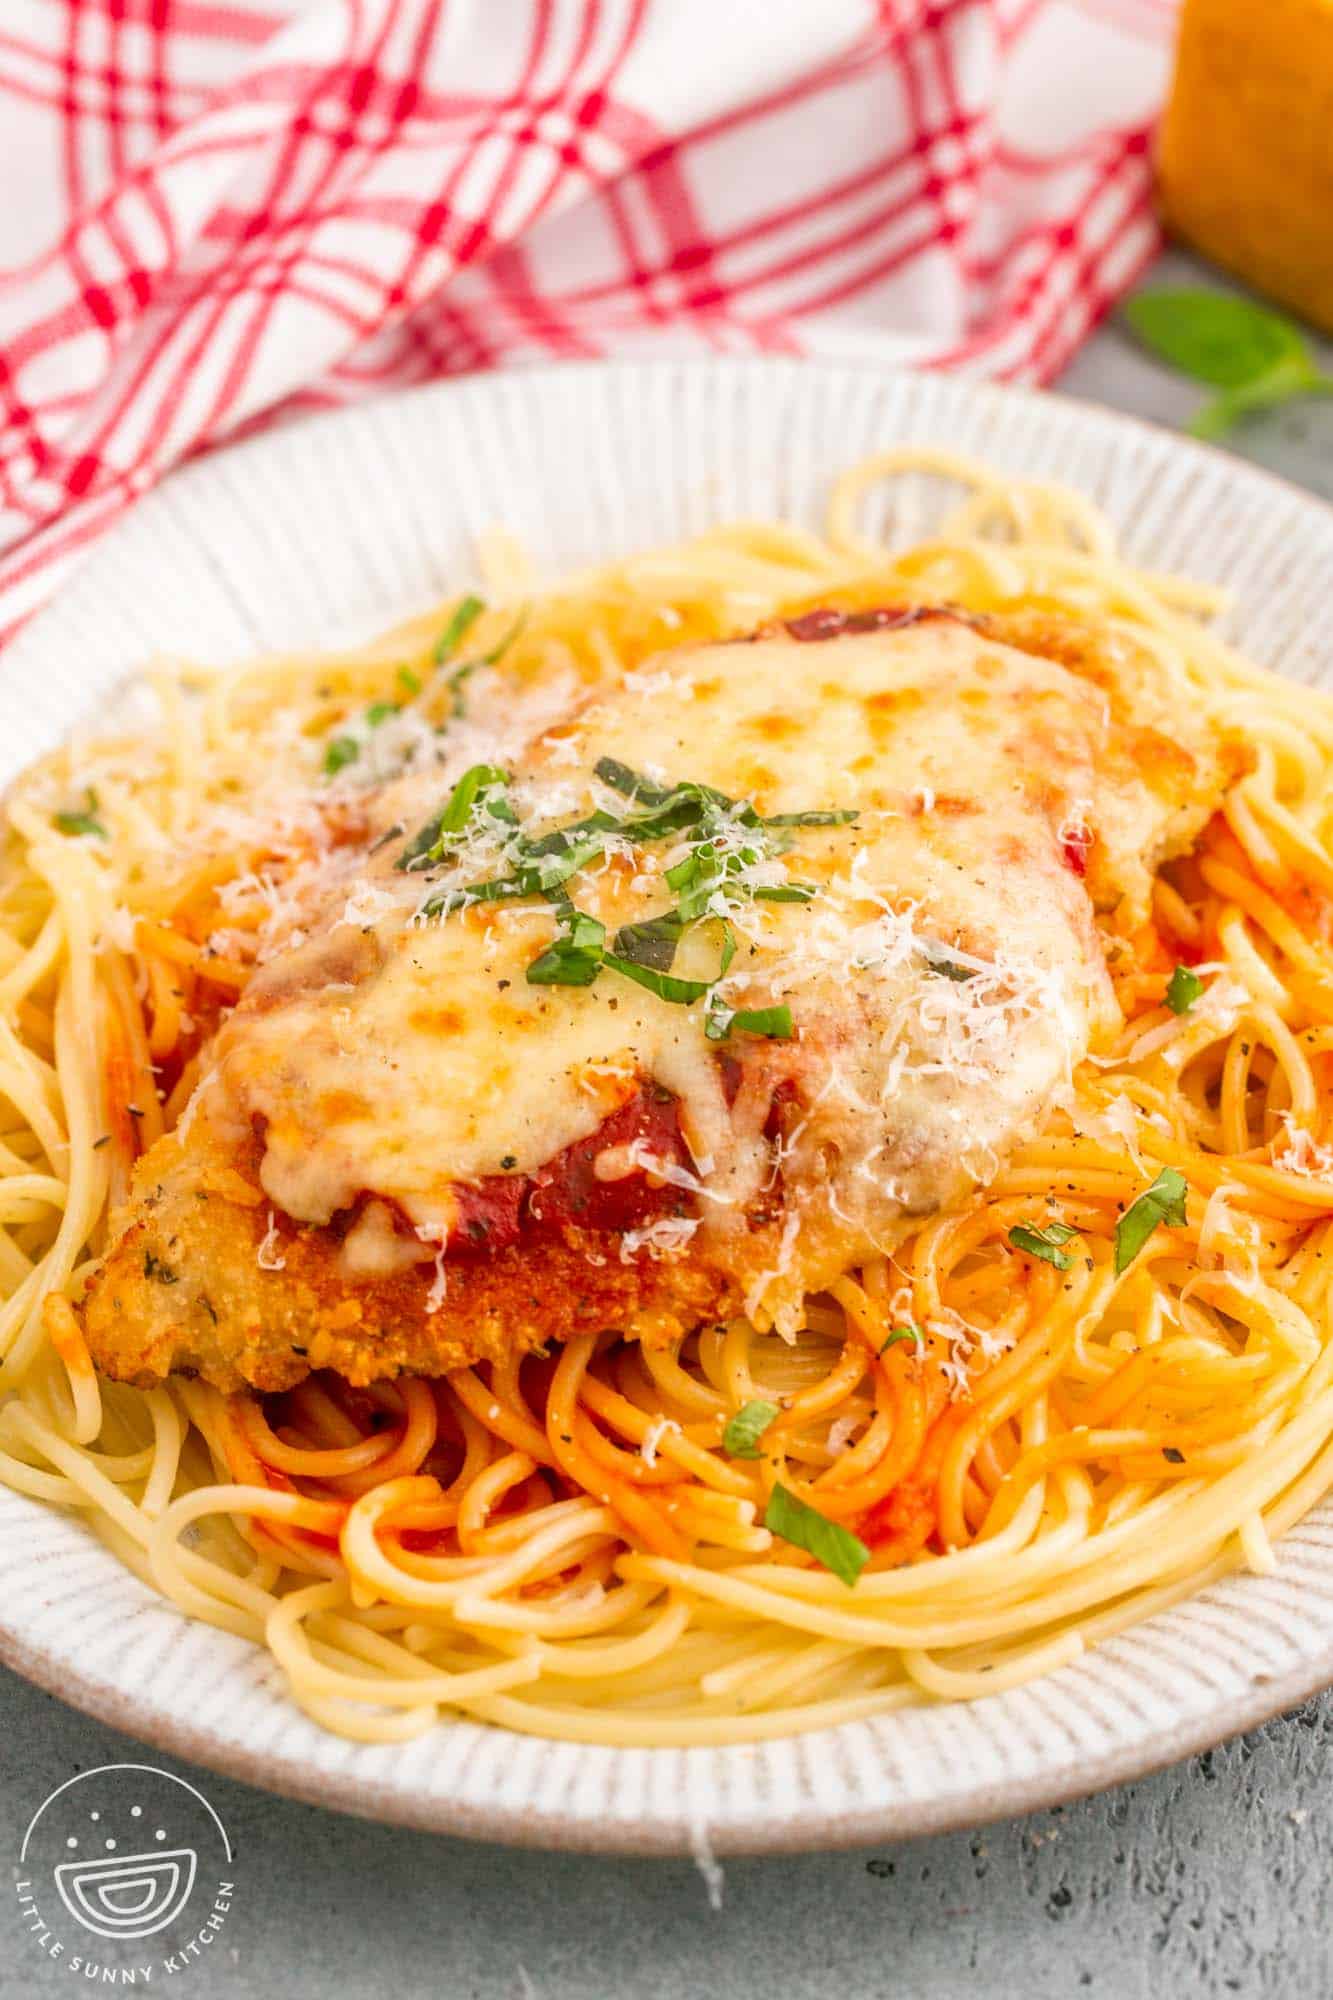 A chicken parmesan cutlet on top of spaghetti, on a white plate.